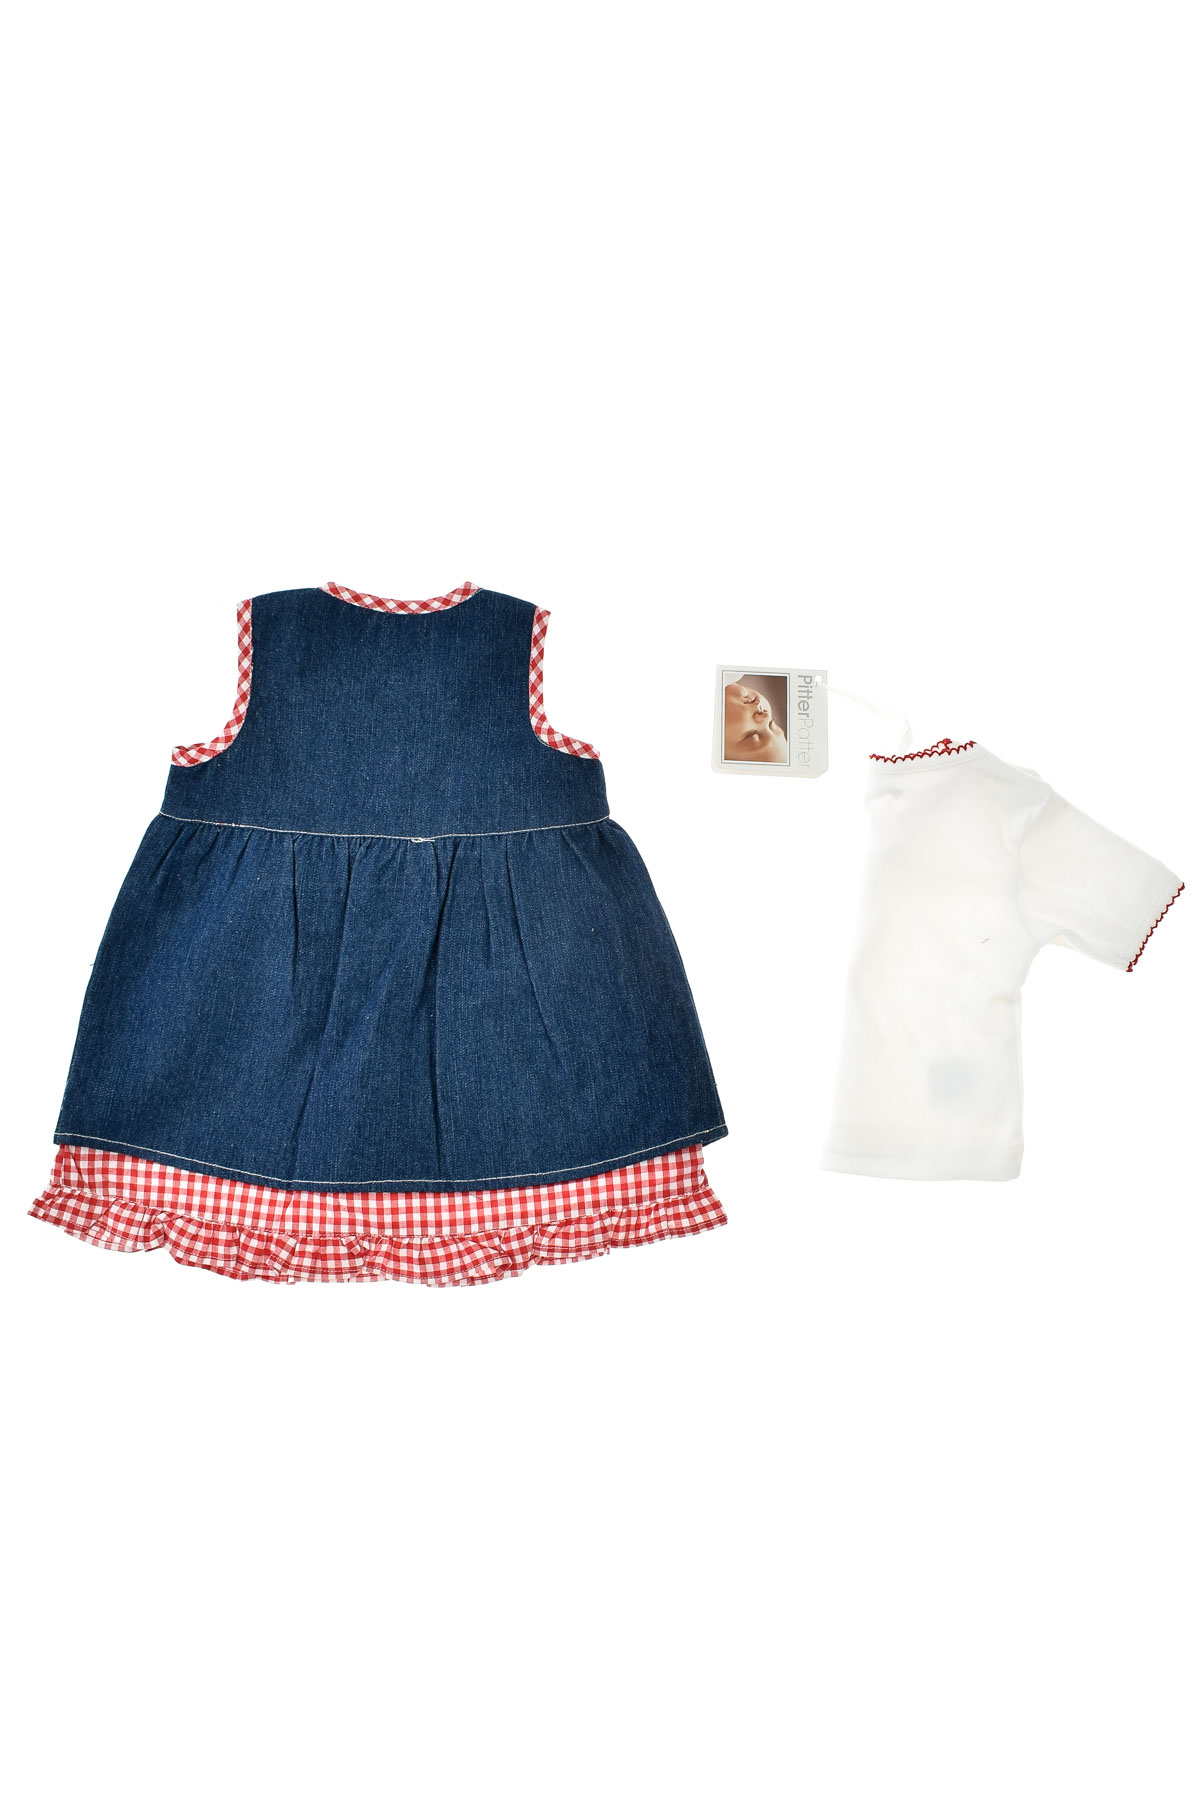 Baby's dress - Pitter Patter - 3